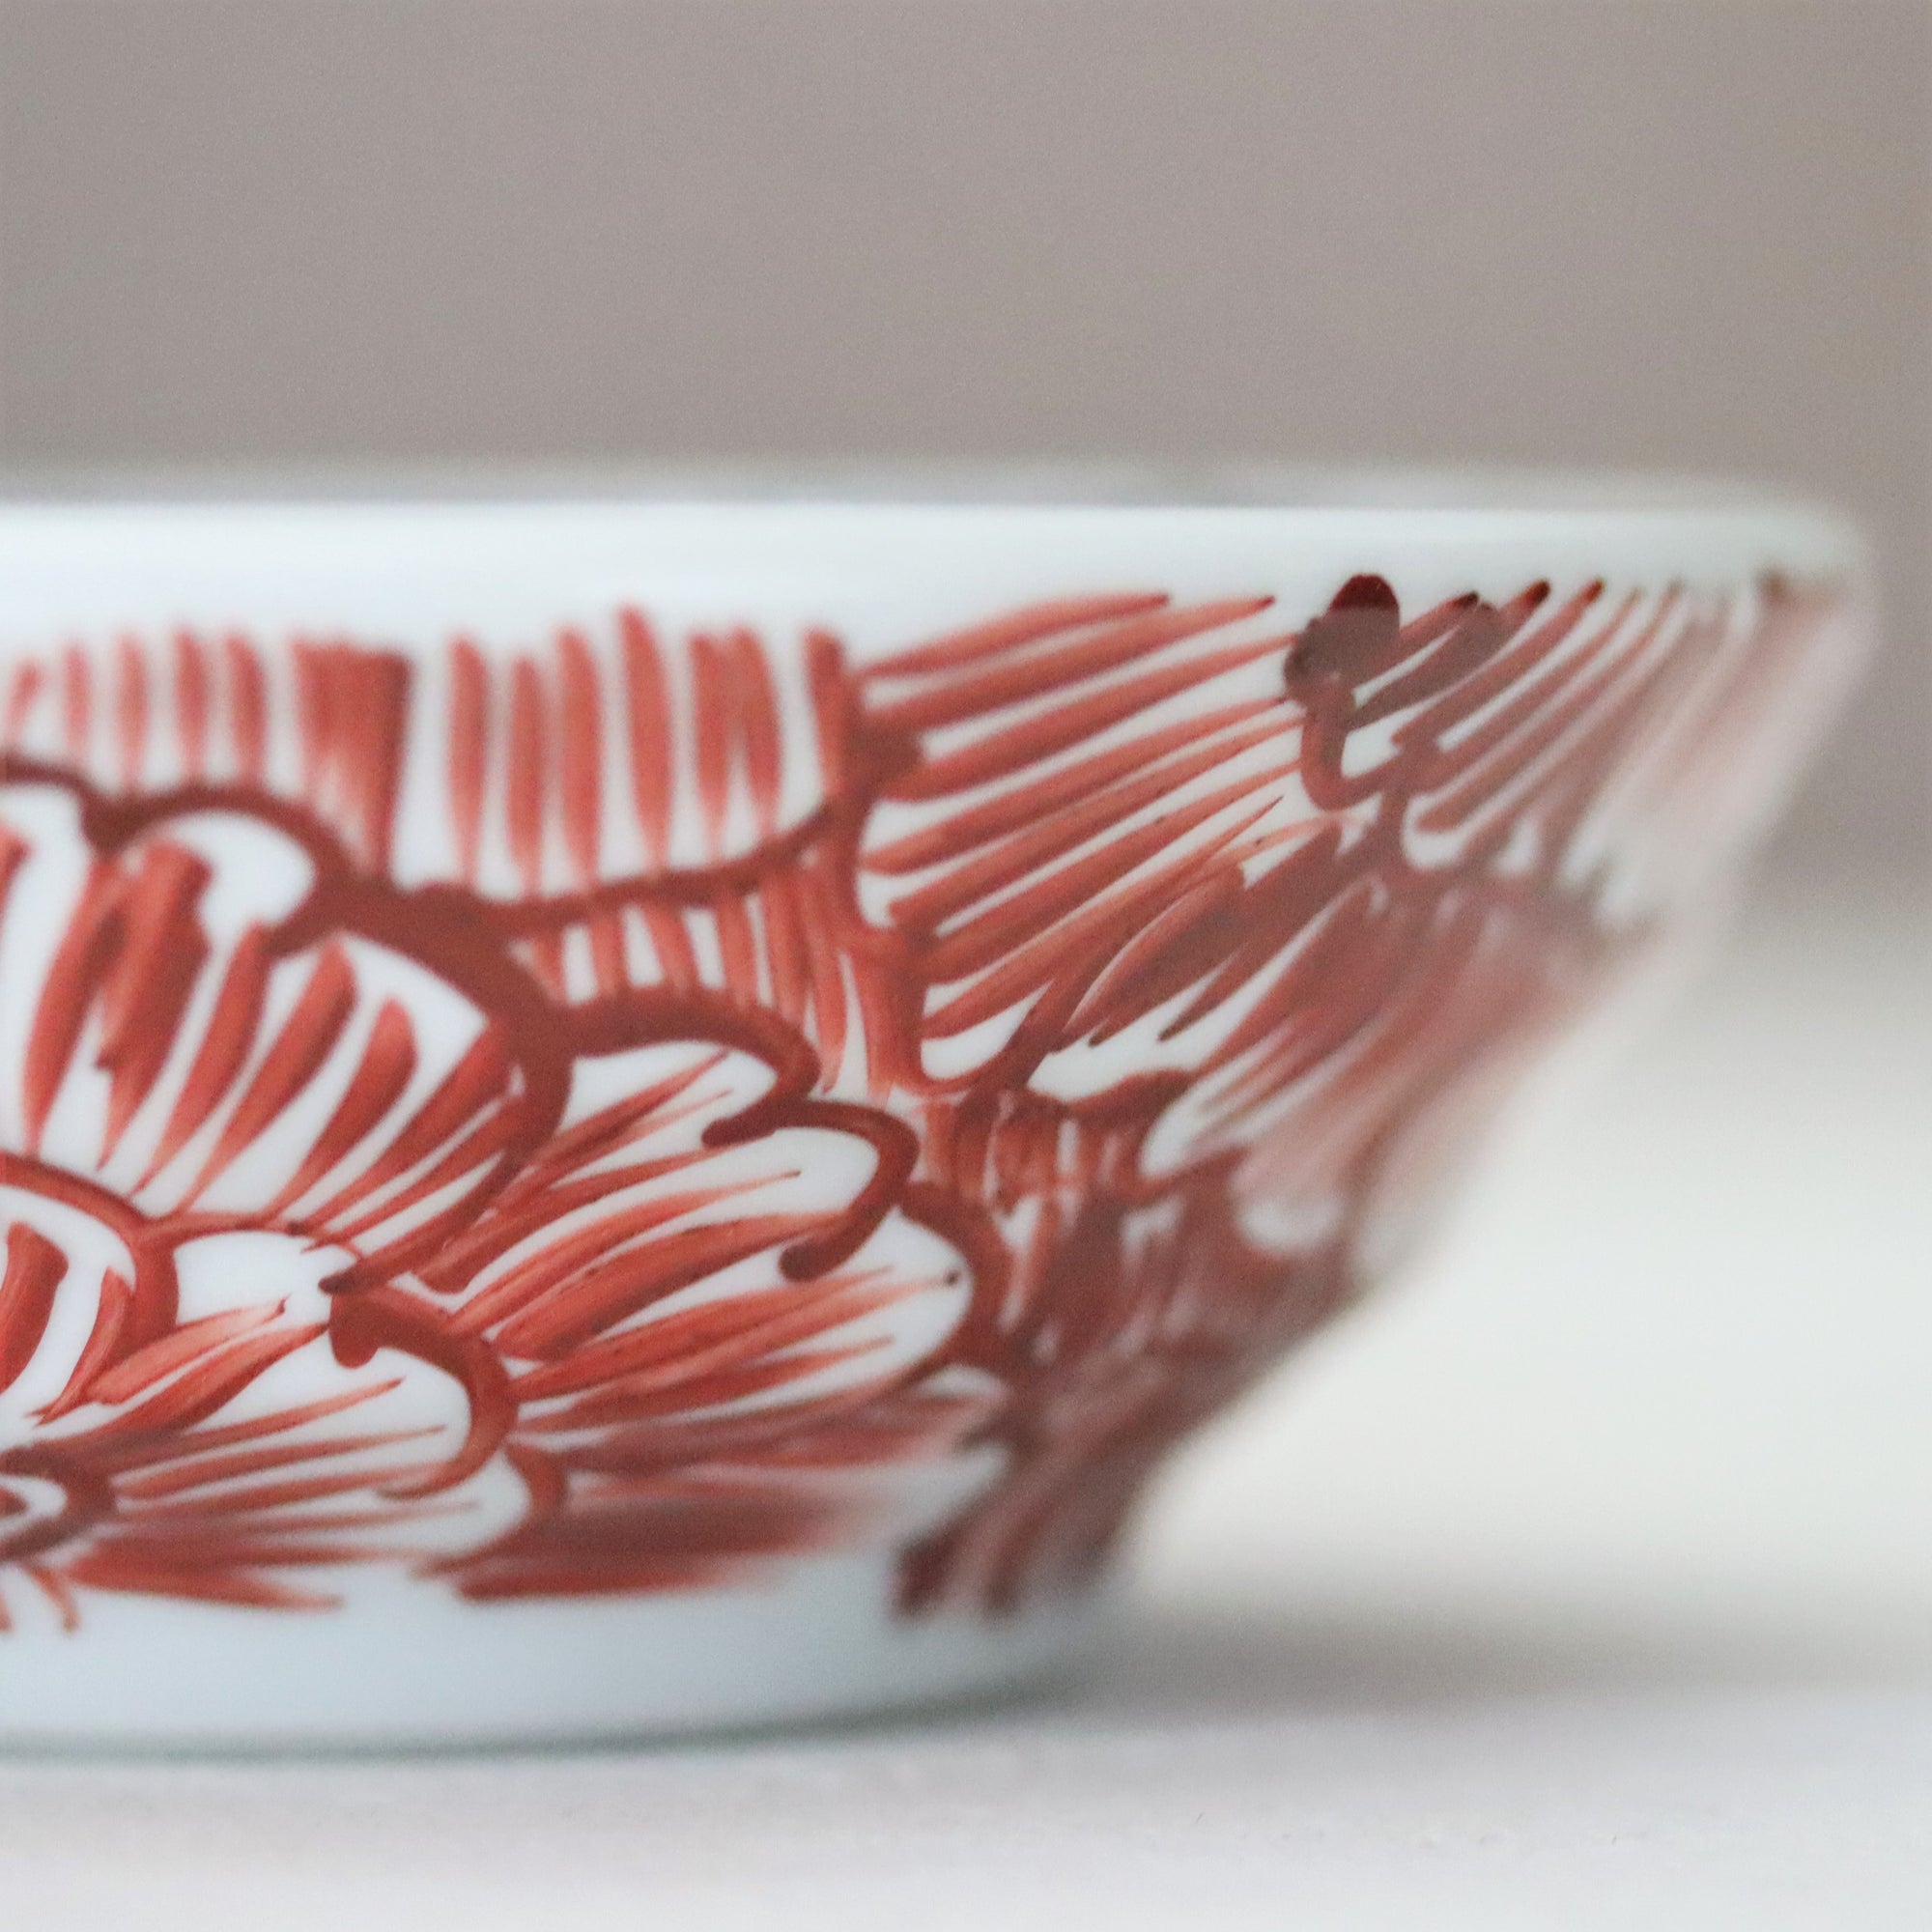 Some-Nishiki floral patterned small bowl